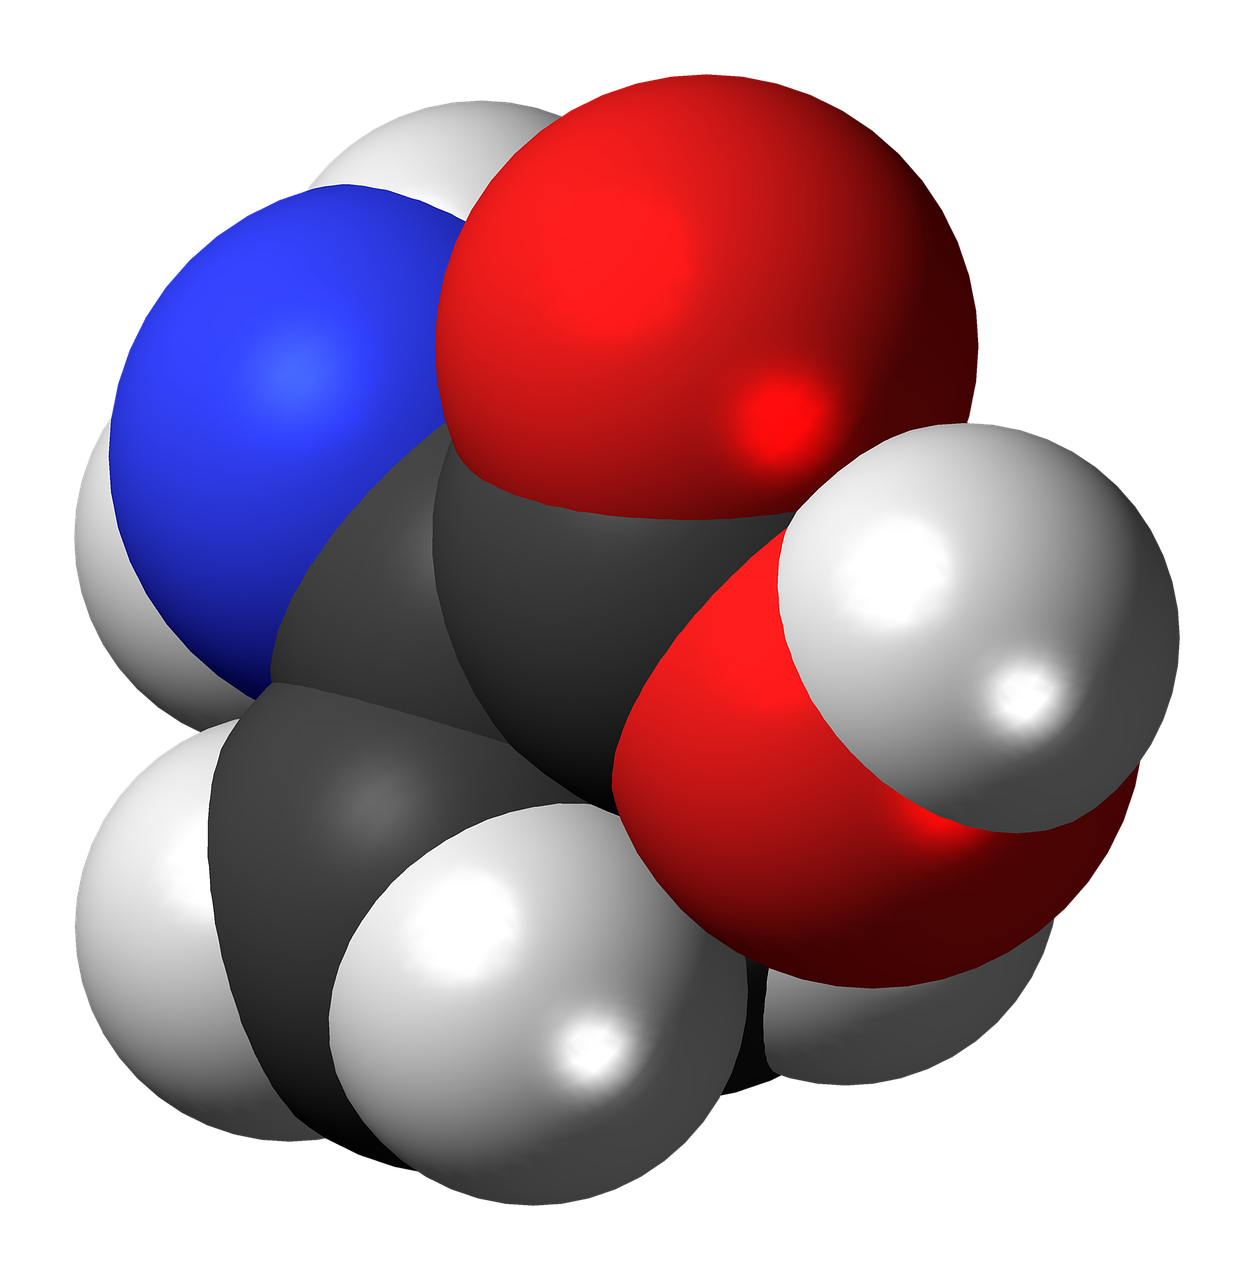 a bunch of balls sitting on top of each other, a raytraced image, bauhaus, detailed chemical diagram, on a black background, wikipedia, colors red white blue and black